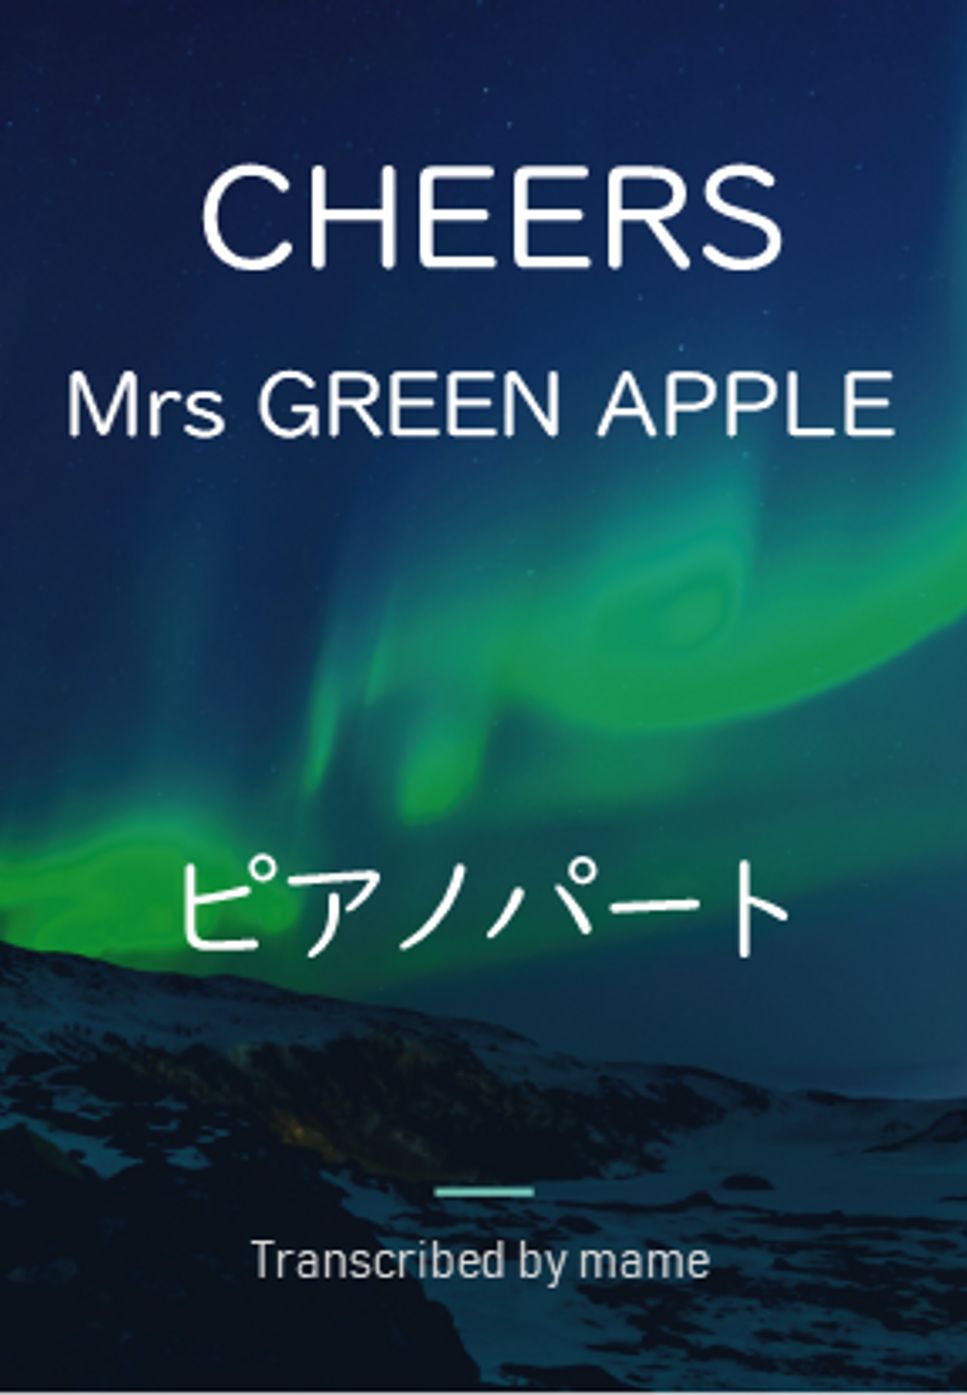 Mrs GREEN APPLE - CHEERS (piano part) by mame